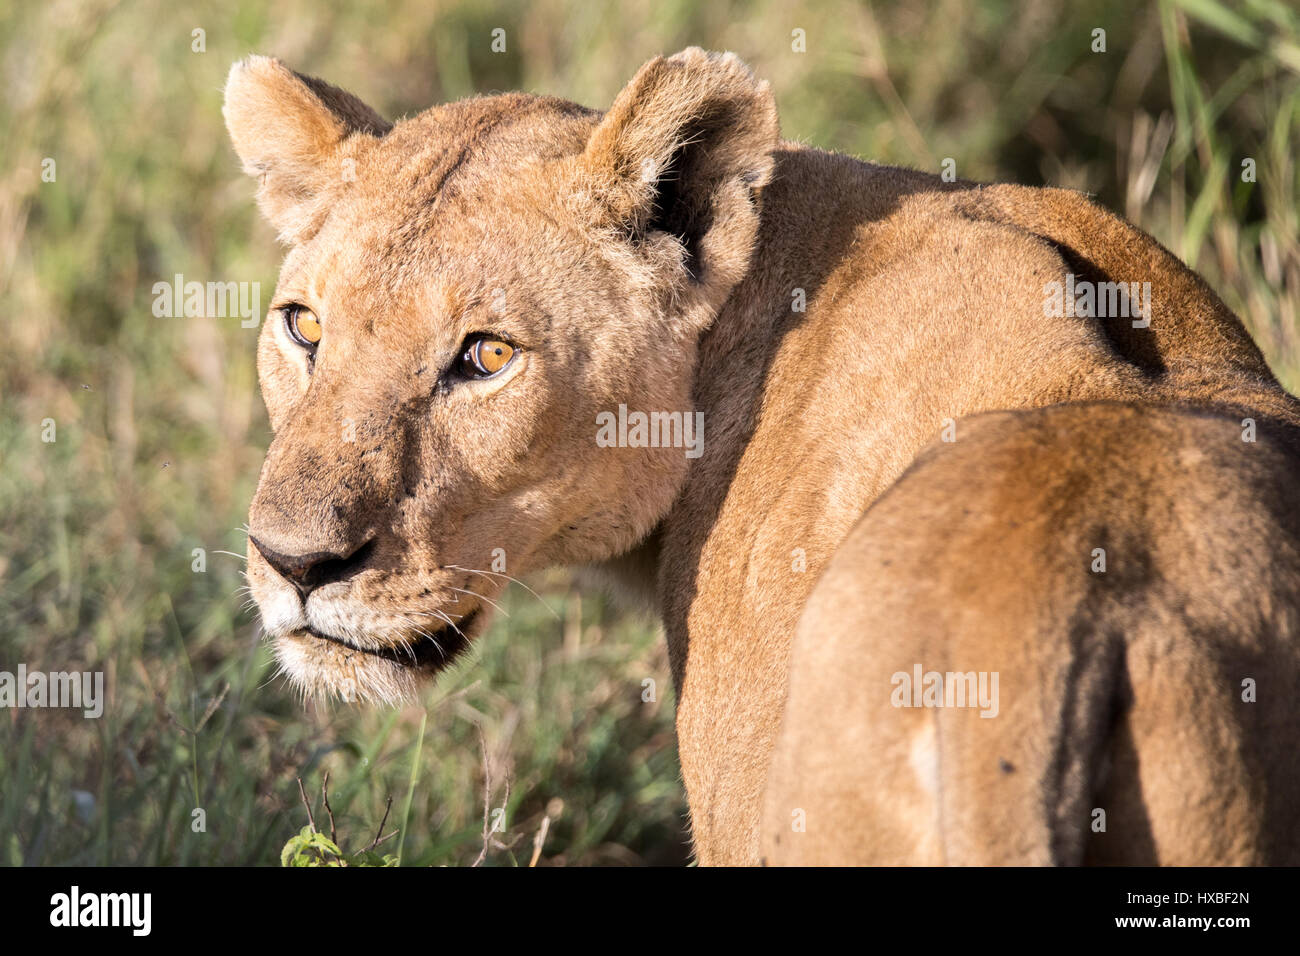 One lioness turning to look at the camera Stock Photo